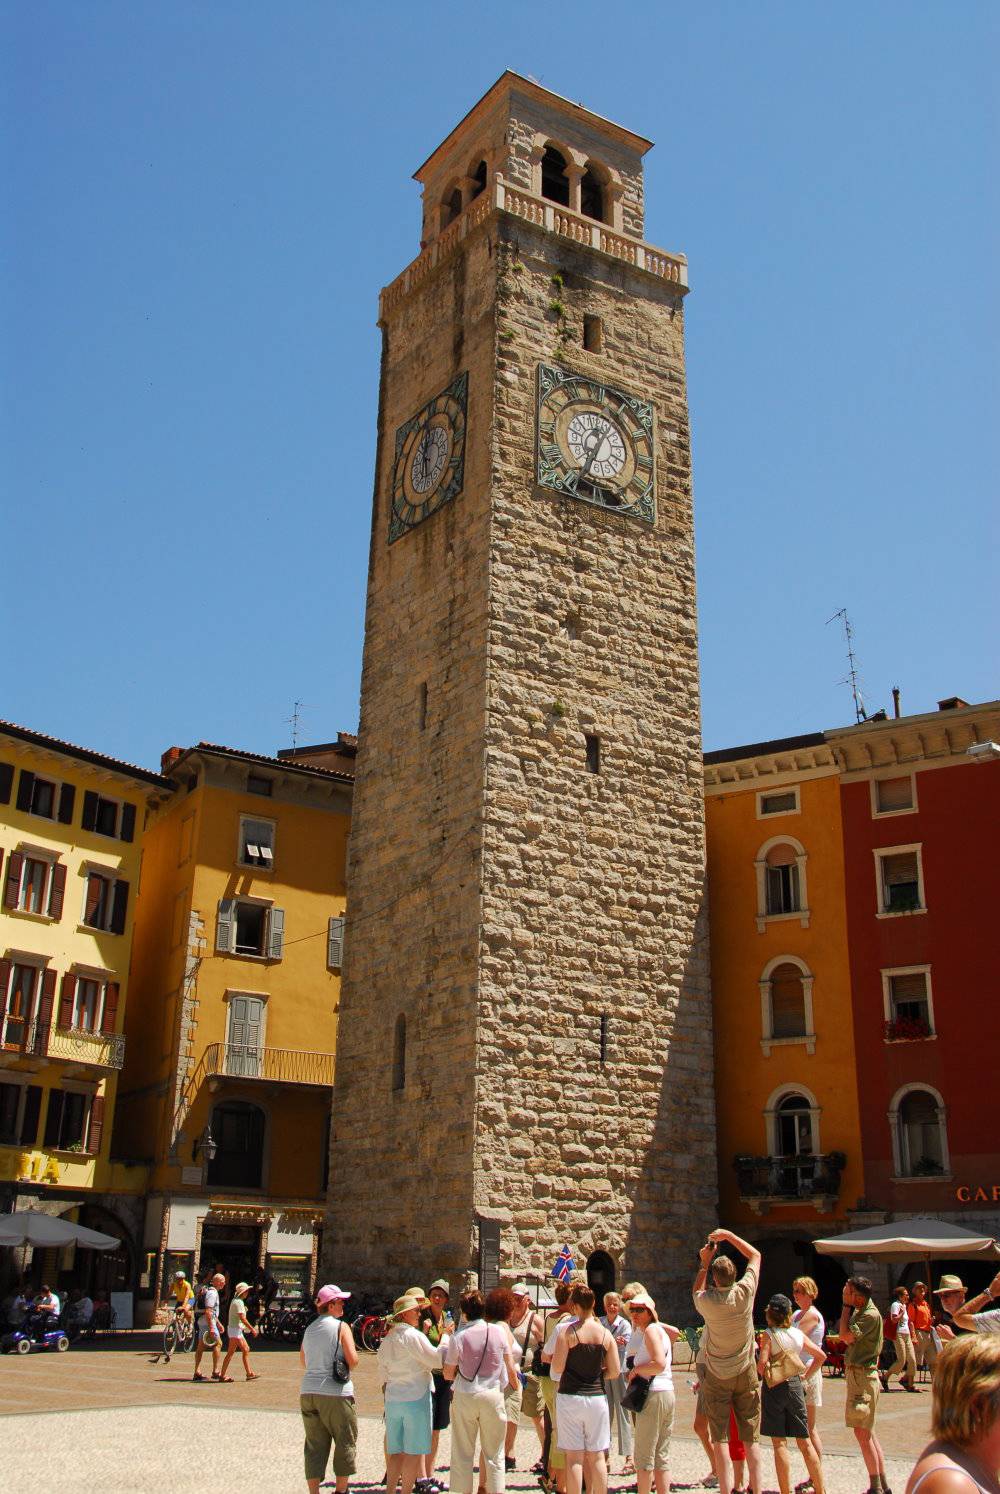 The Apponale Tower